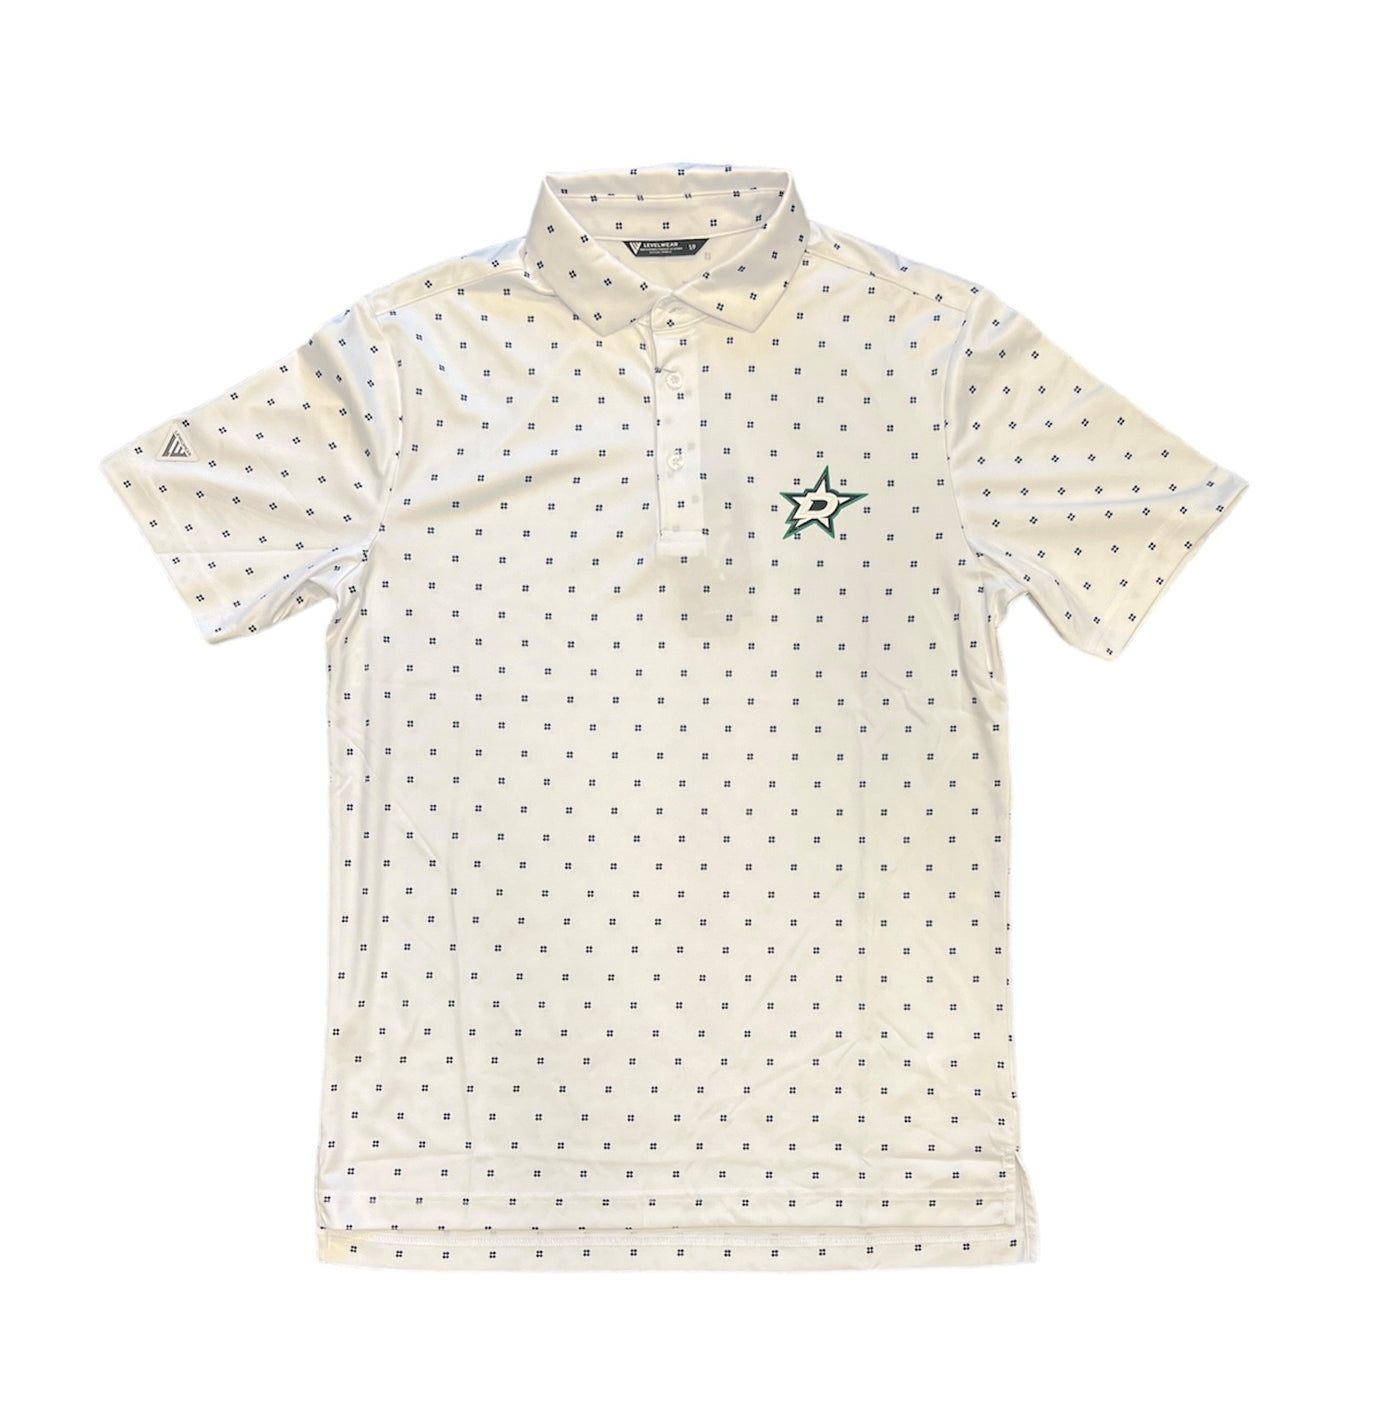 DALLAS STARS LEVELWEAR SCRATCH POLO - Front view of polo